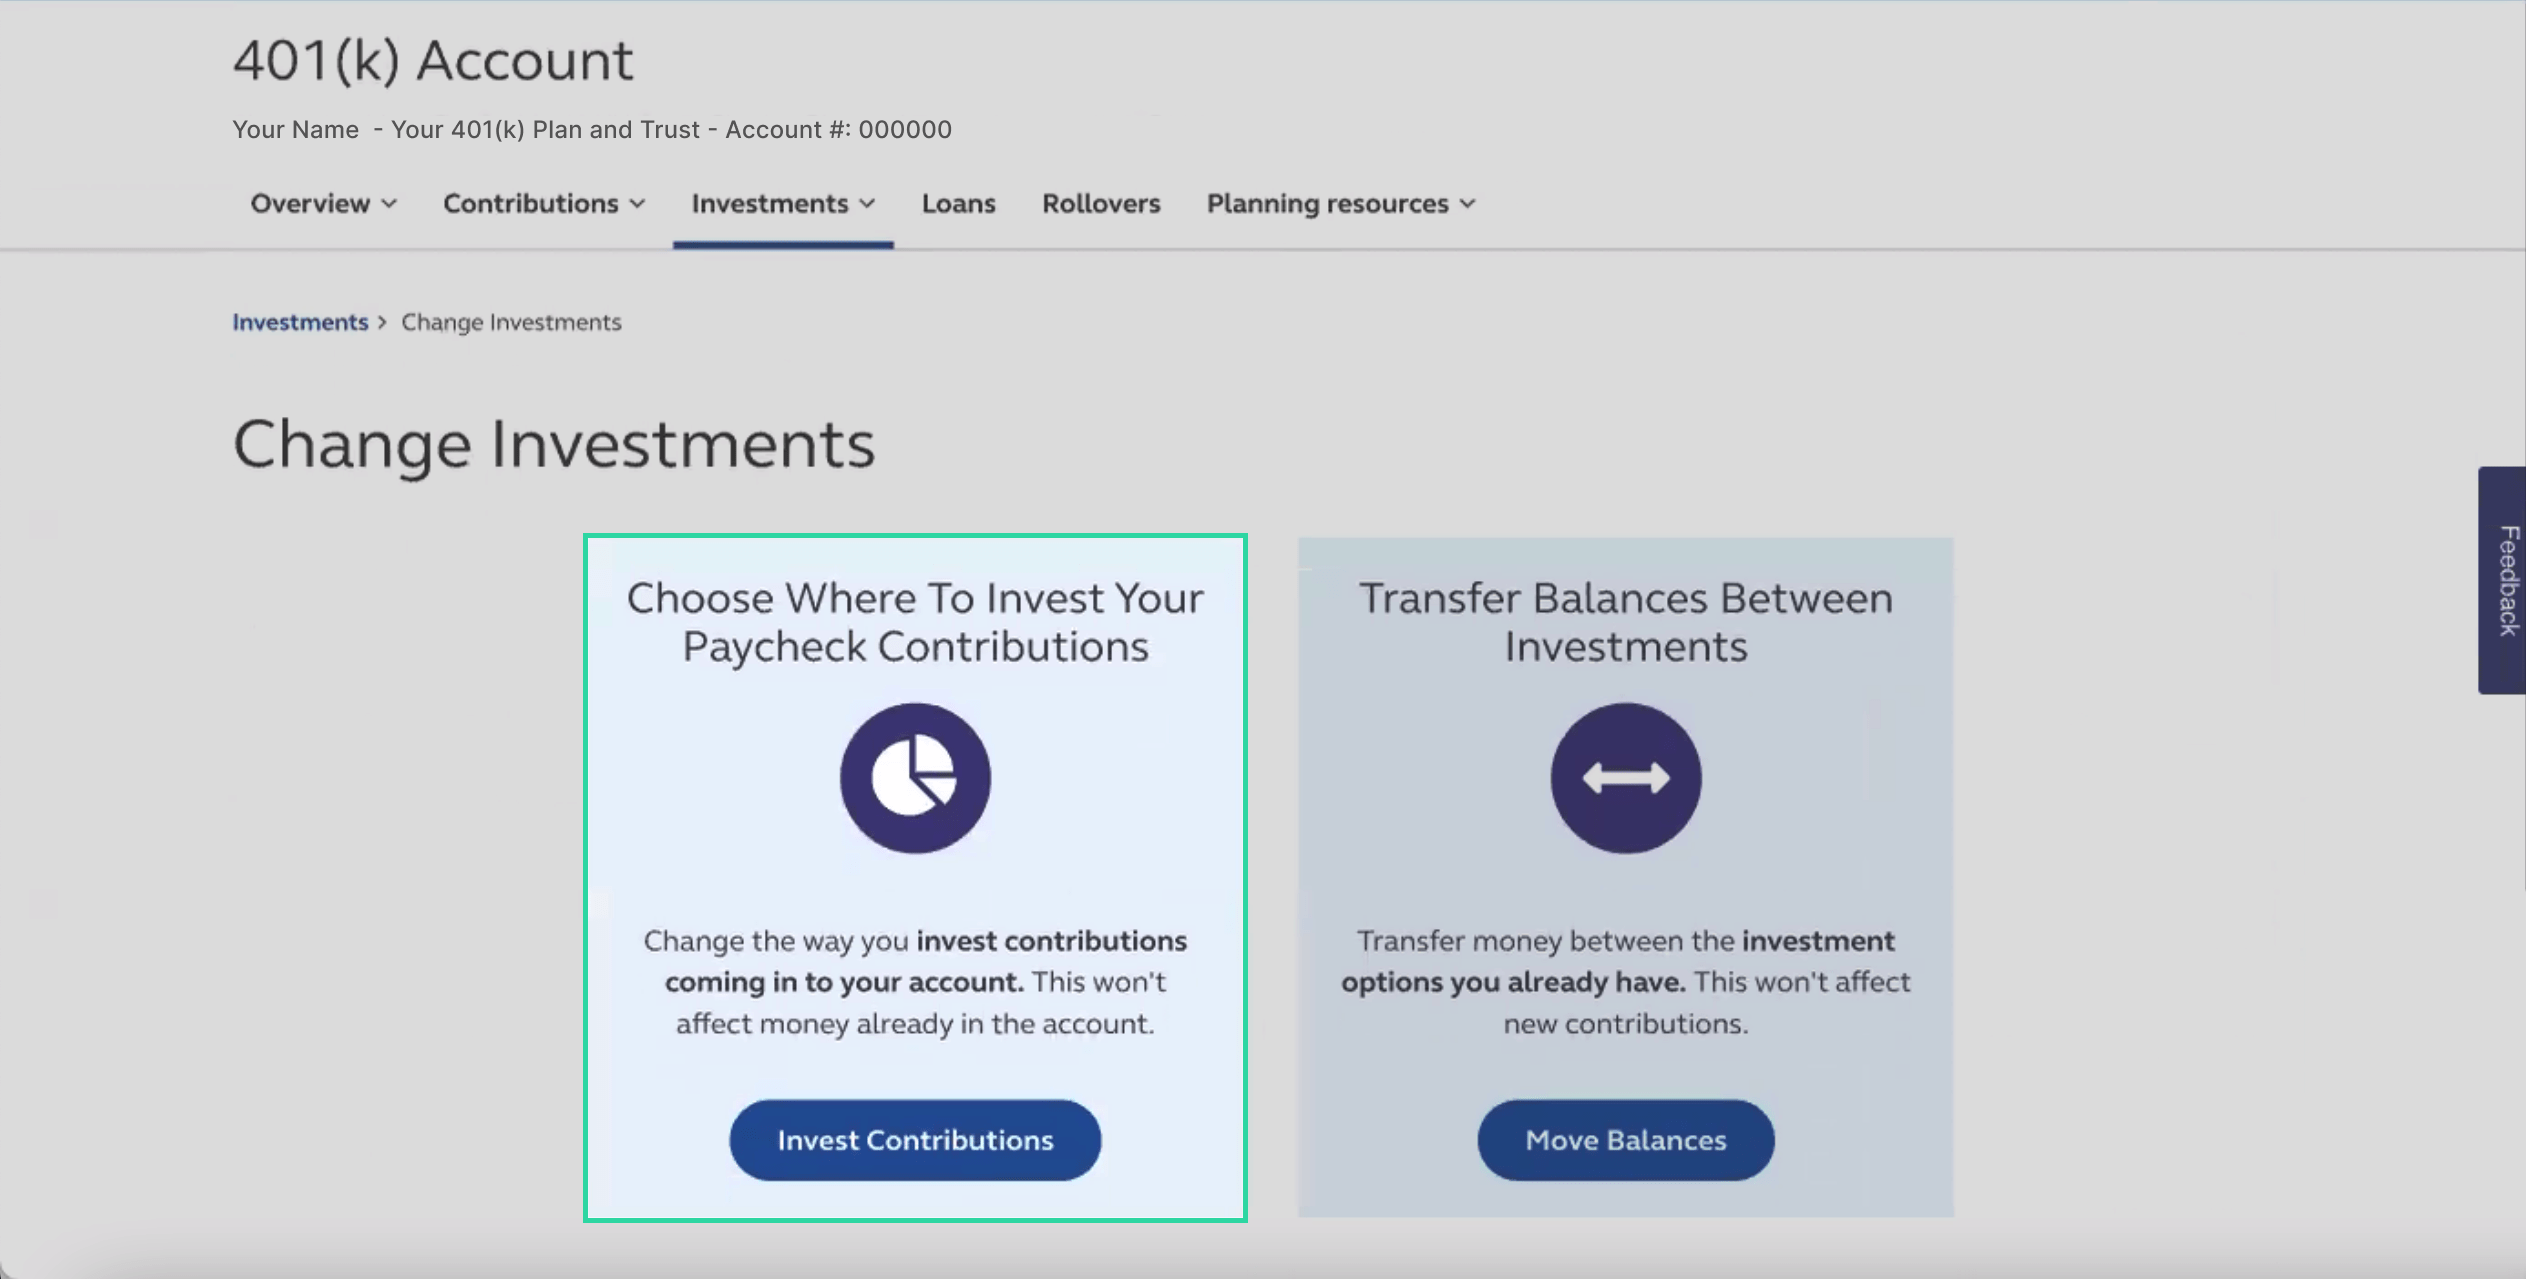 In the “Choose Where To Invest Your Paycheck Contributions” section, choose “Invest Contributions”.